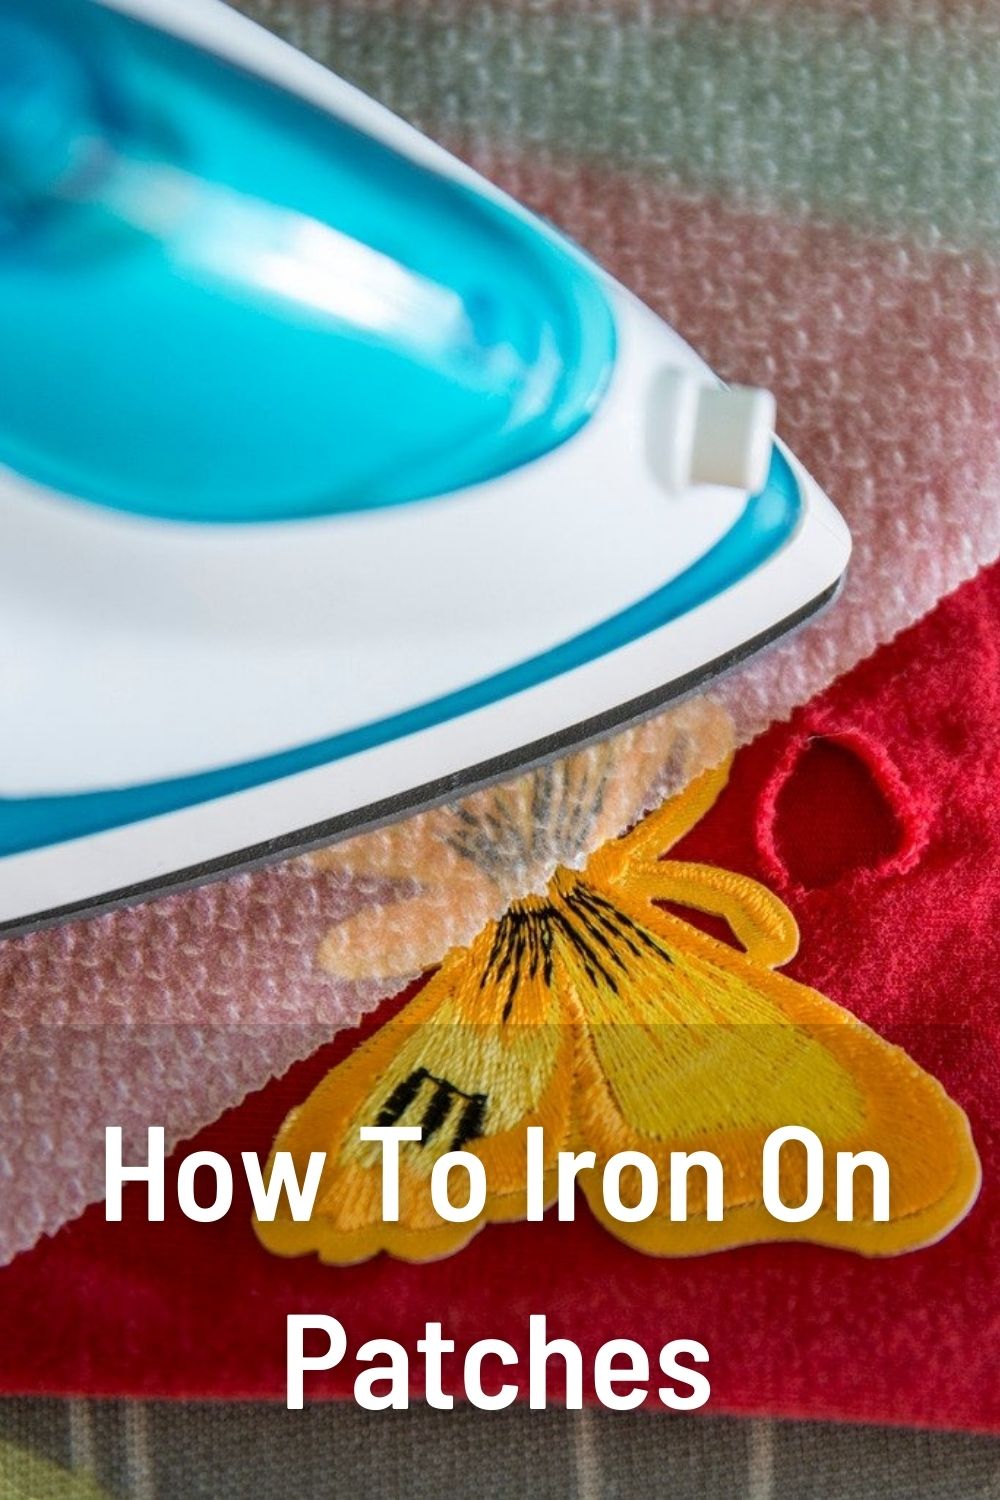 How To Iron On Patches